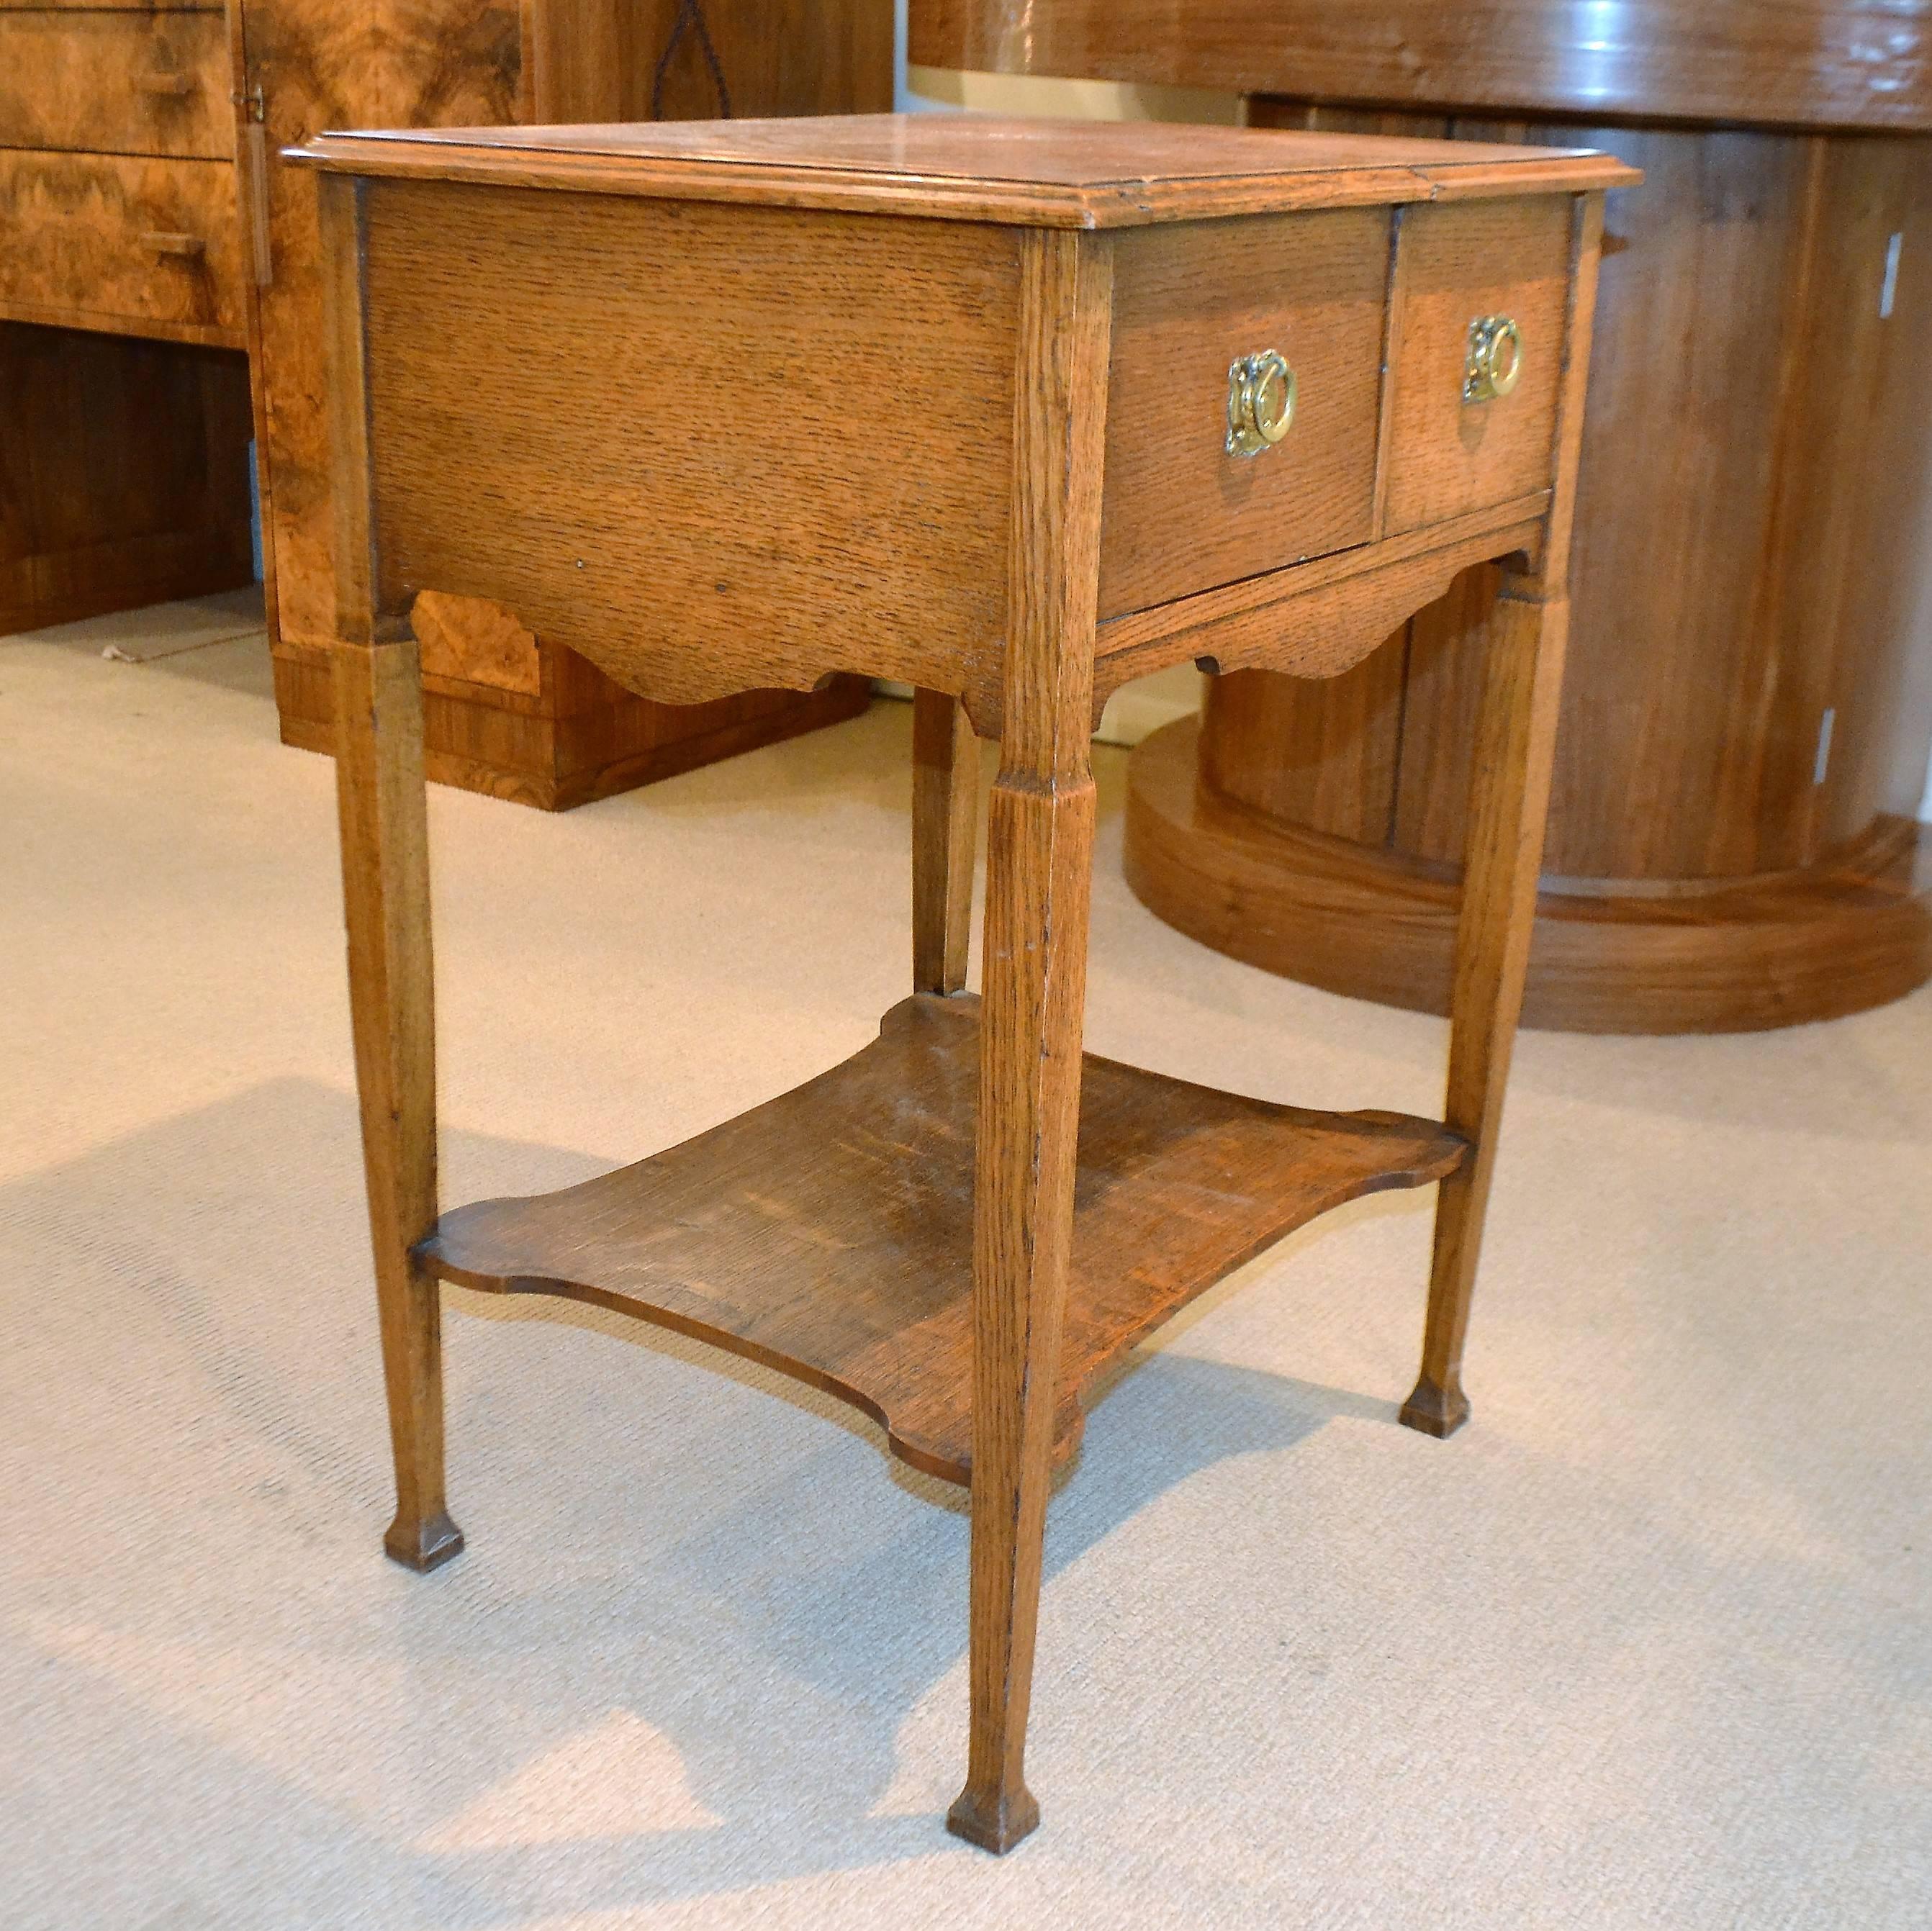 An ingeniously designed small oak table with brass repousse handle plates. It features a sliding top, cupboard and drawer, with fitments for the enjoyment of tobacco. A real conversation starter, and with many potential uses today. A good example of